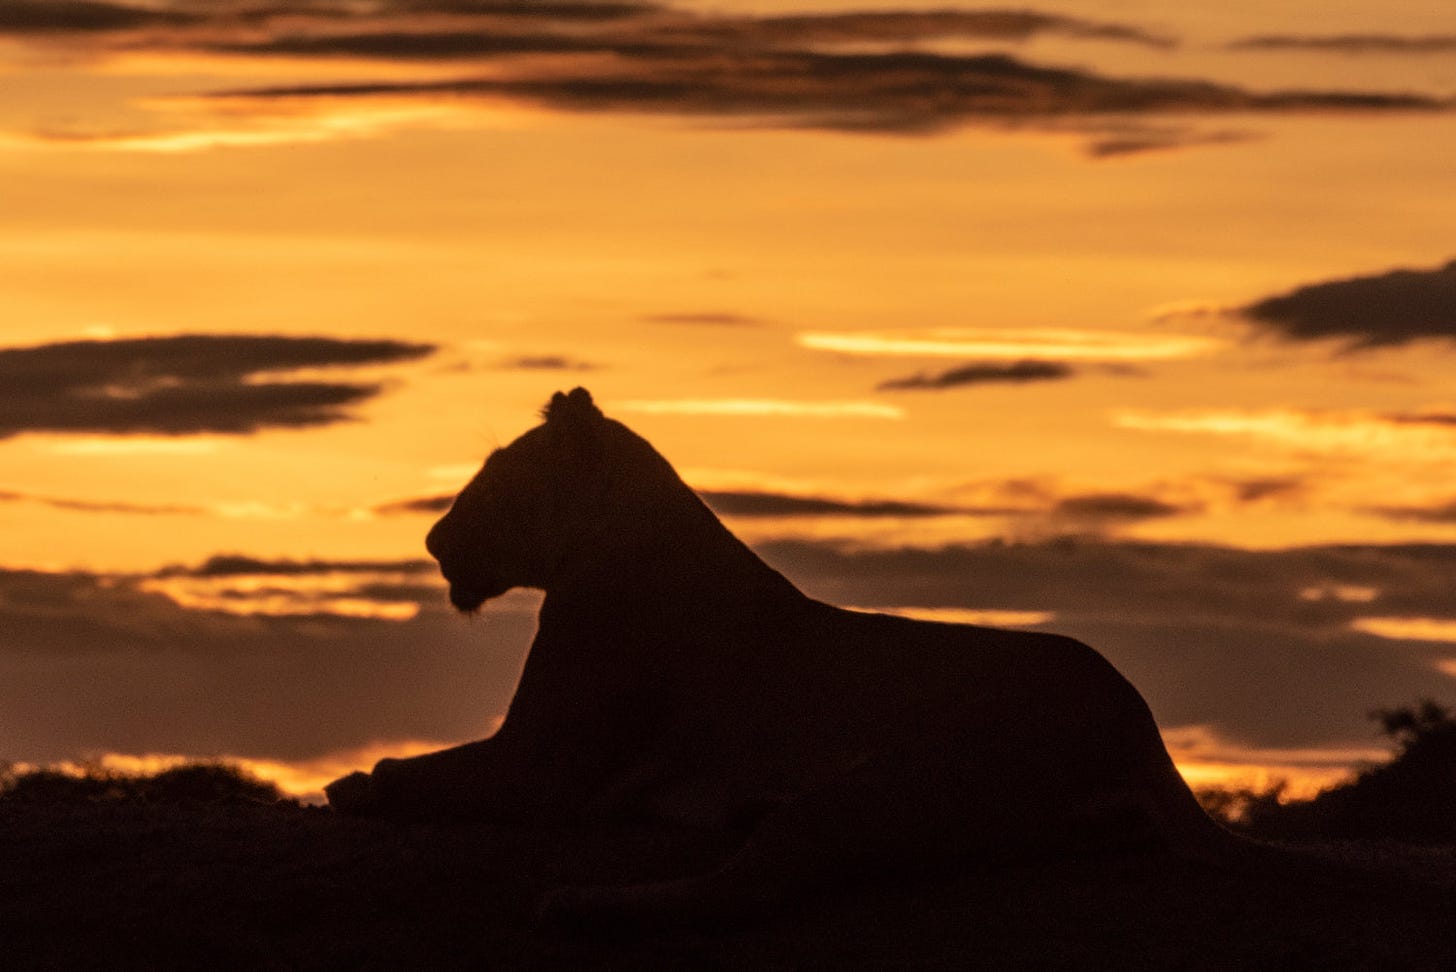 Lioness in silhouette at sunrise on the bank of the Maji Mbele pool